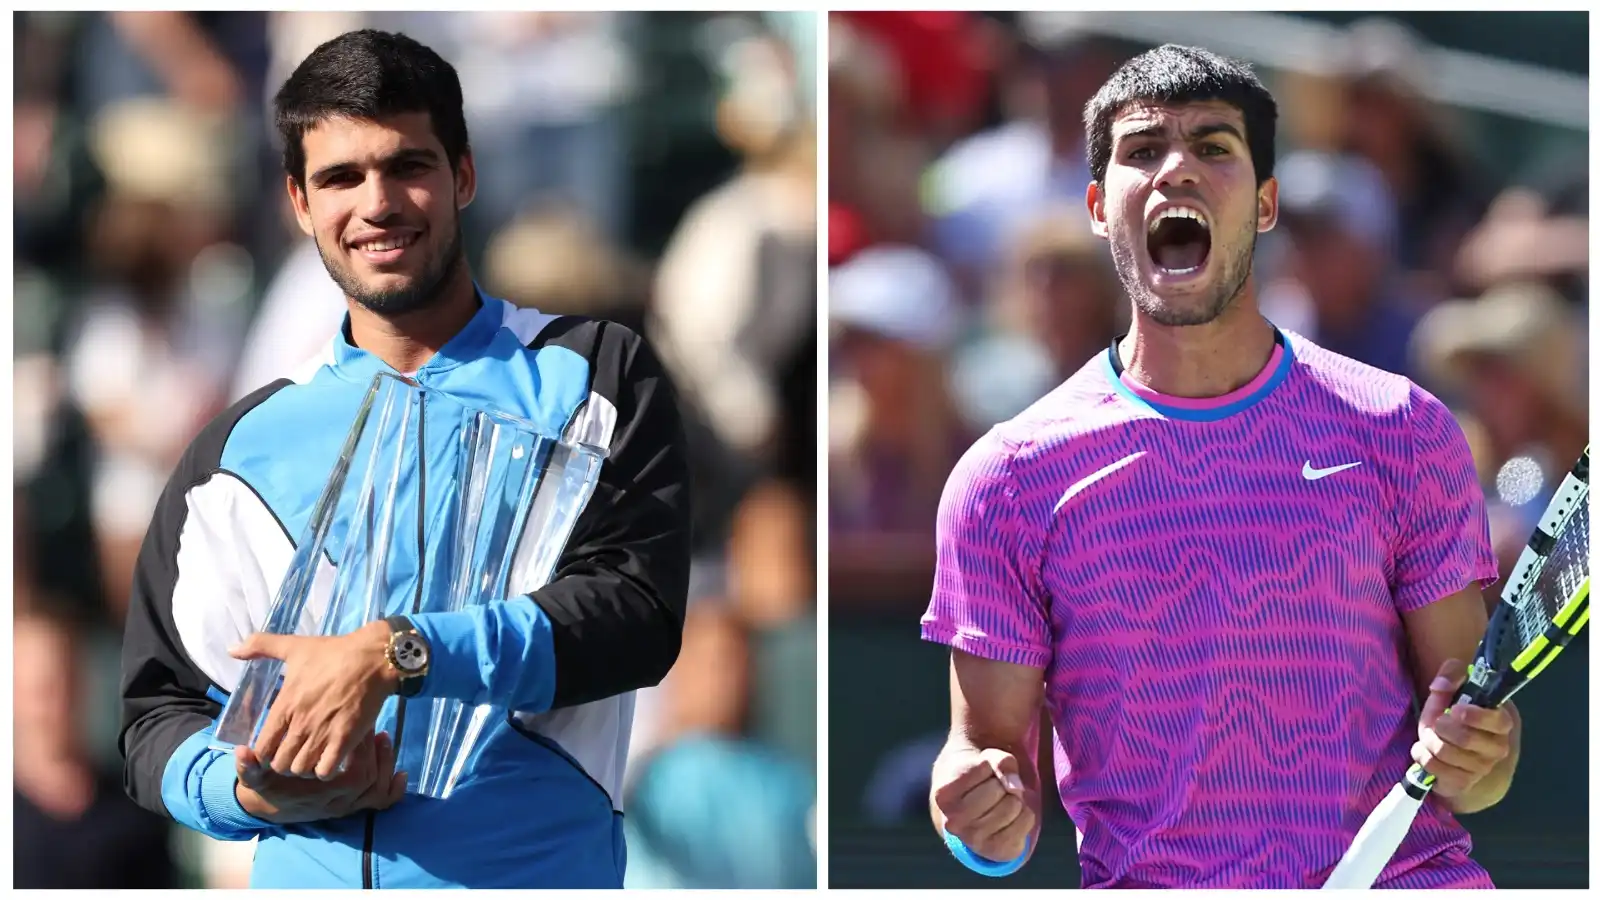 Carlos Alcaraz Wins His 2nd Straight Indian Wells Title Beating Daniil Medvedev in The Final